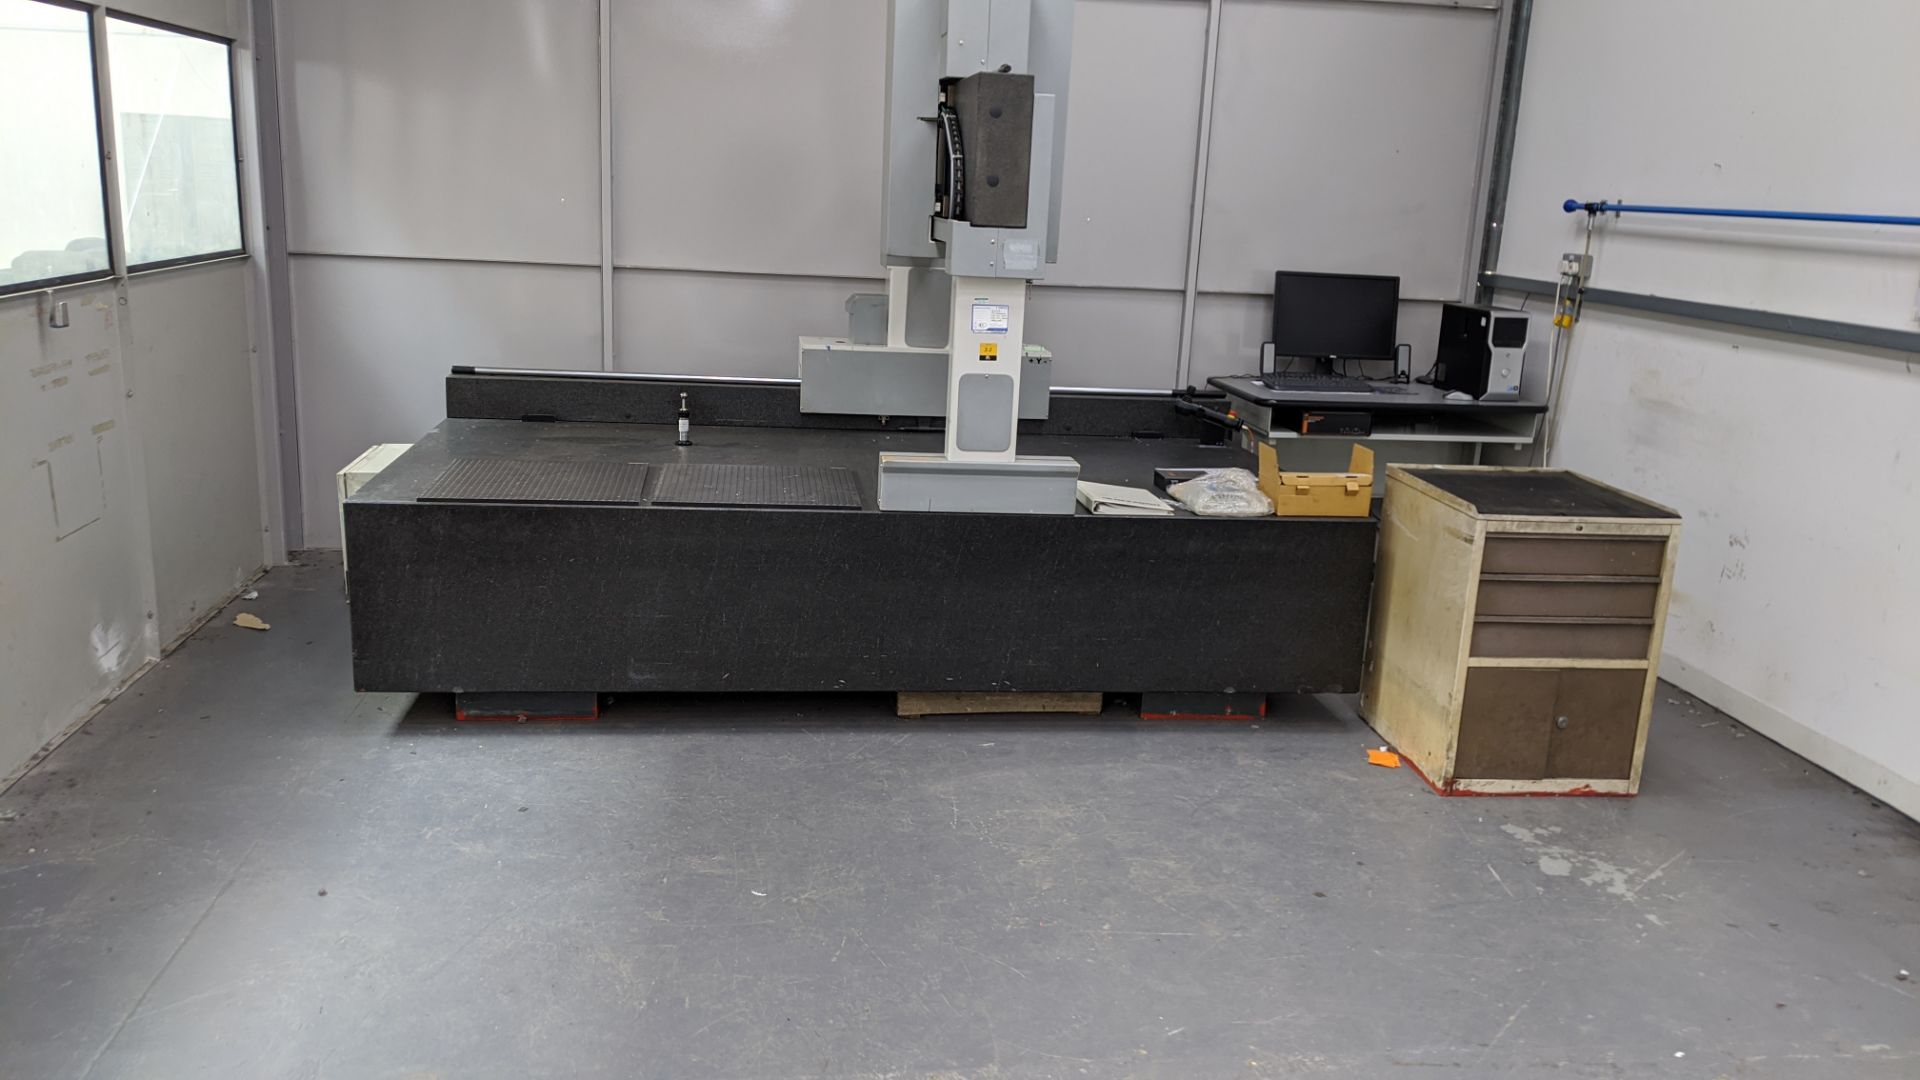 LK Microvector CMM model G80 with Renishaw model PH10T probe on granite table measuring approx. - Image 19 of 28